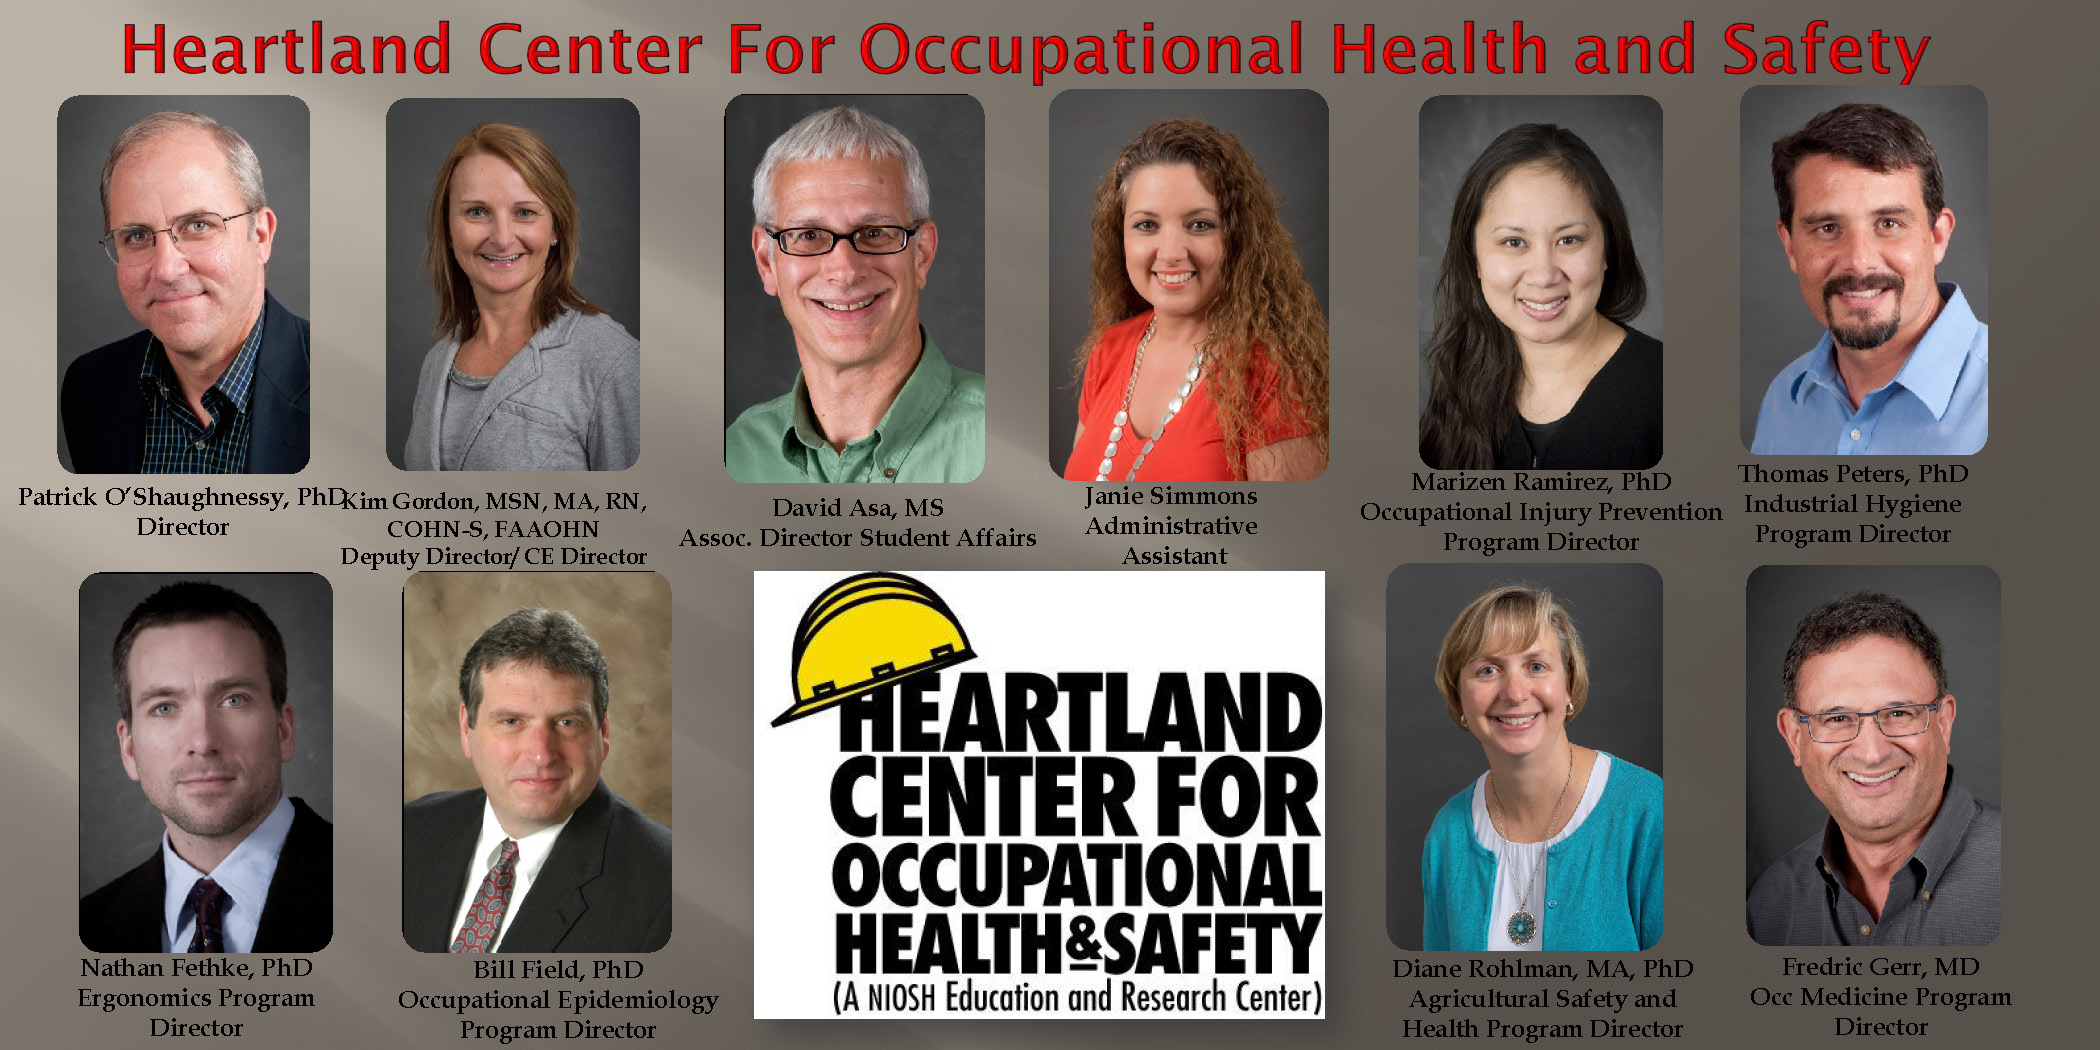 Heartland Center For Occupational Health and Safety